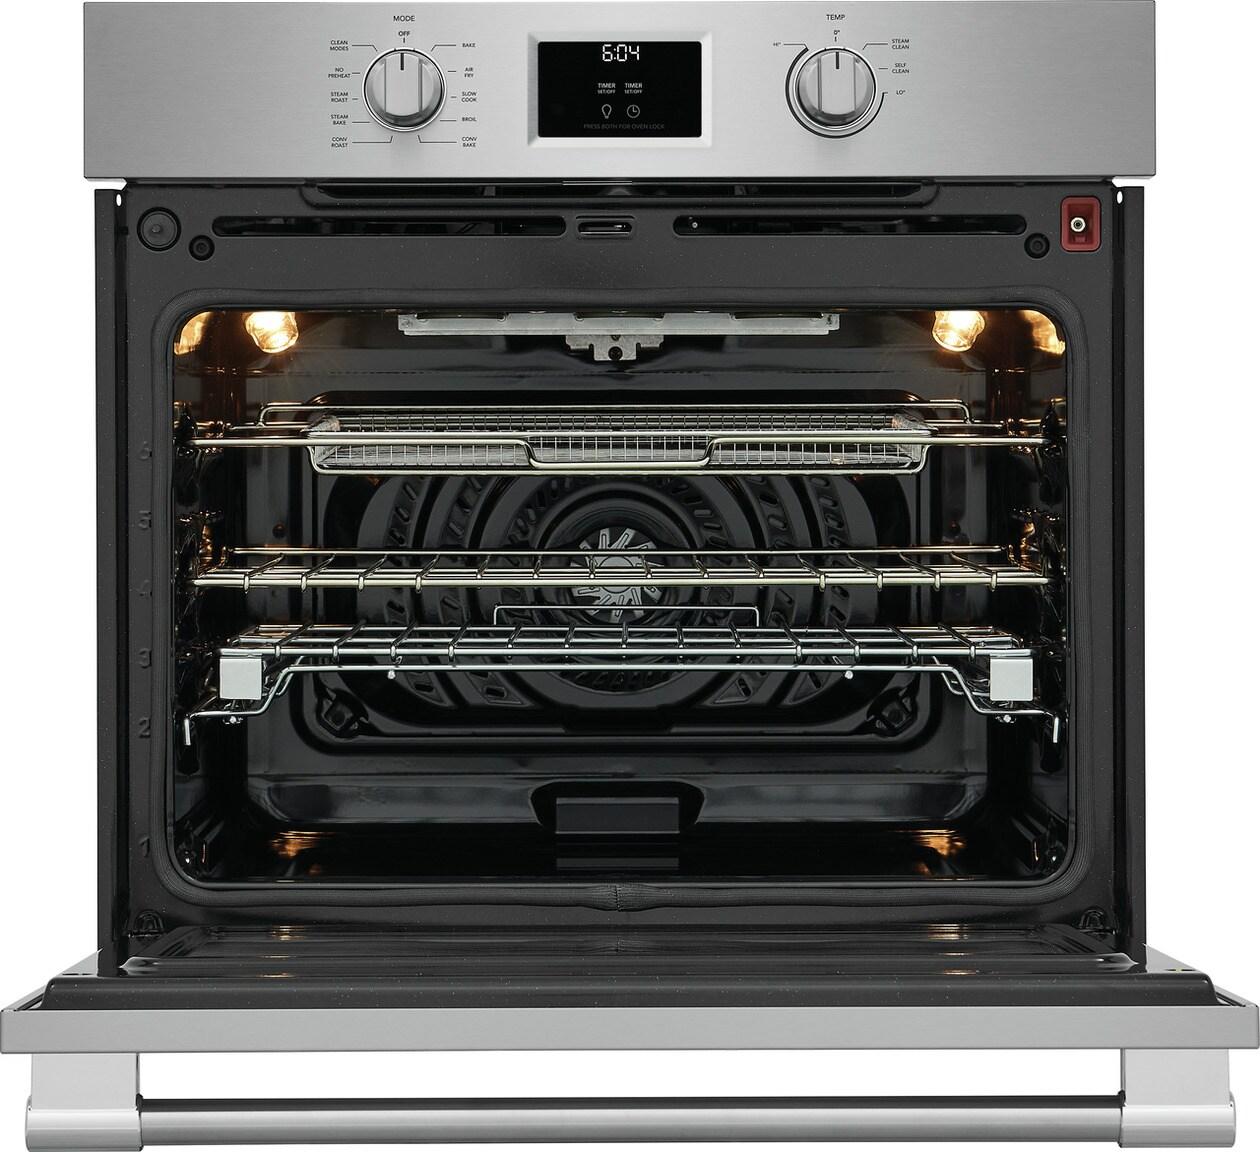 Frigidaire Professional 30" Single Wall Oven with Total Convection